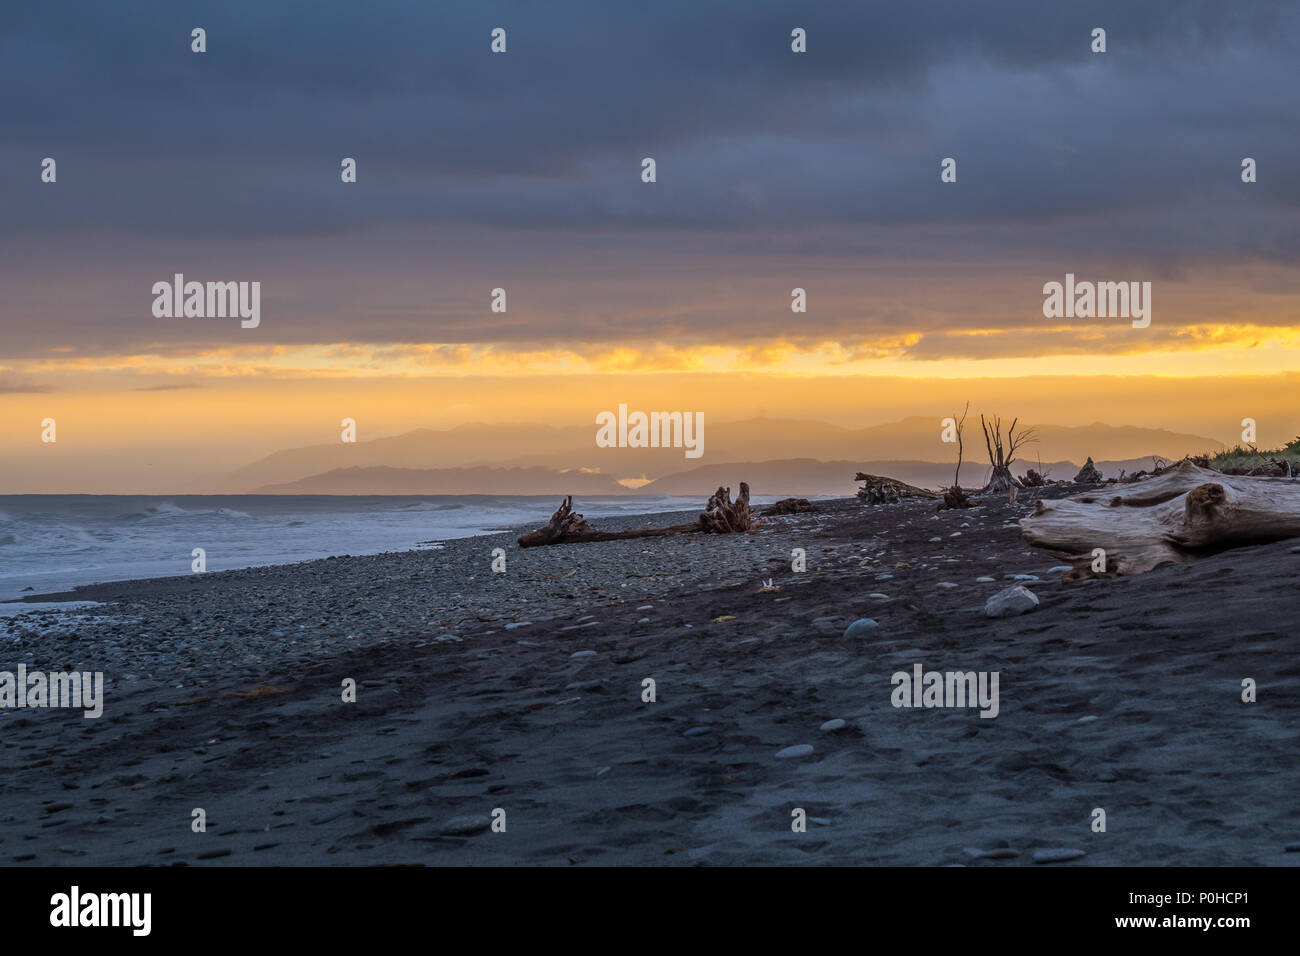 Hokitika beach in the morning with many pieces of wood in on the beach, Located on the west coast of New Zealand's South Island. Stock Photo